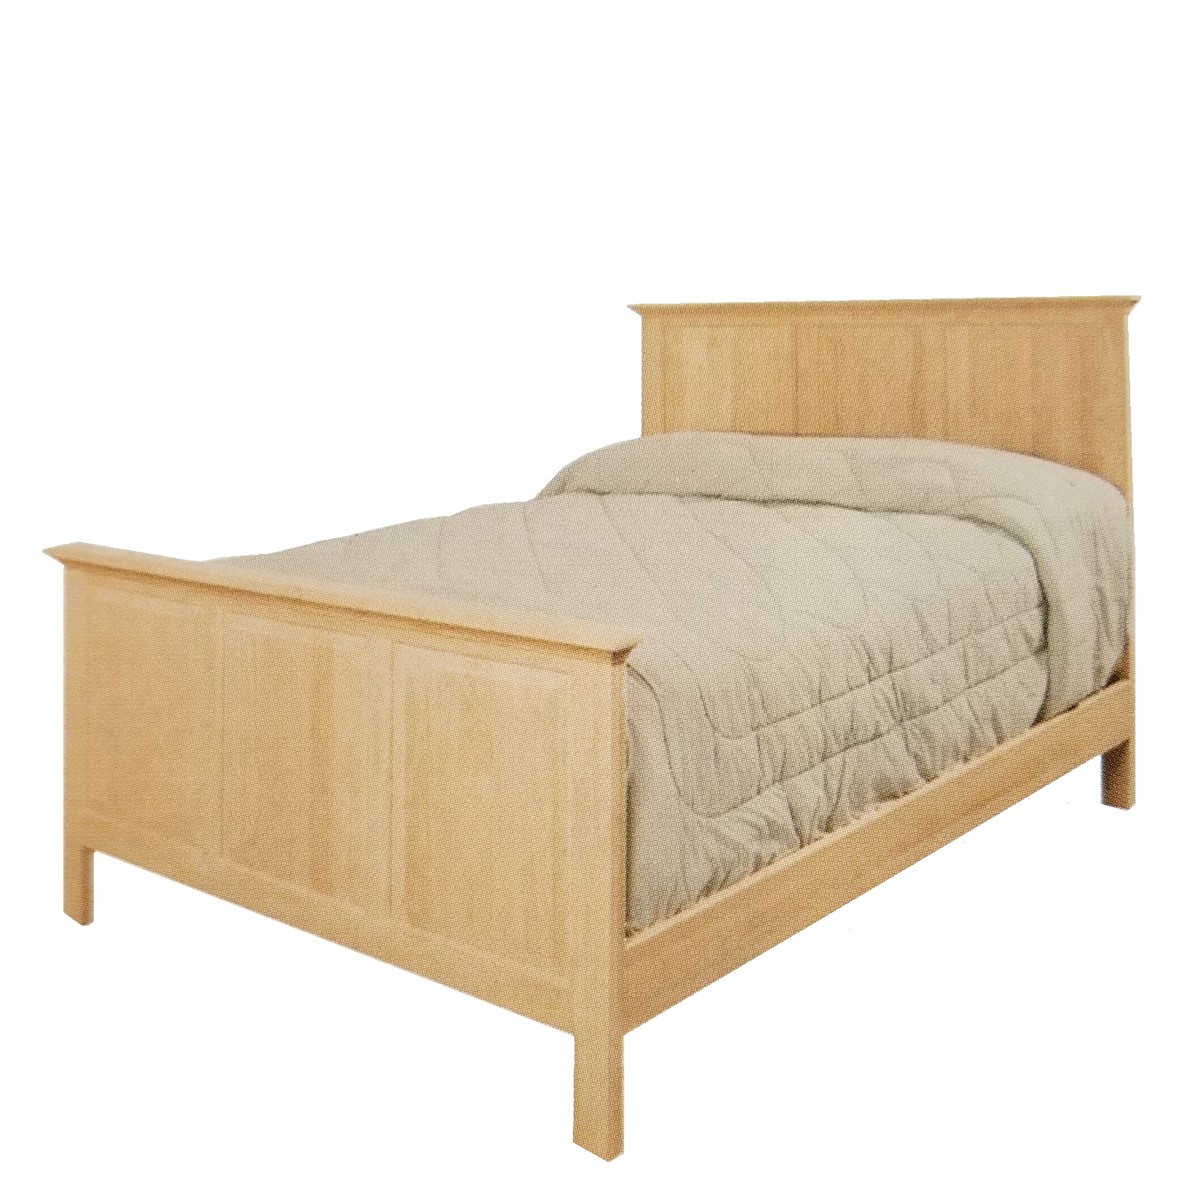 627 SERIES:  Camden Collection Bed